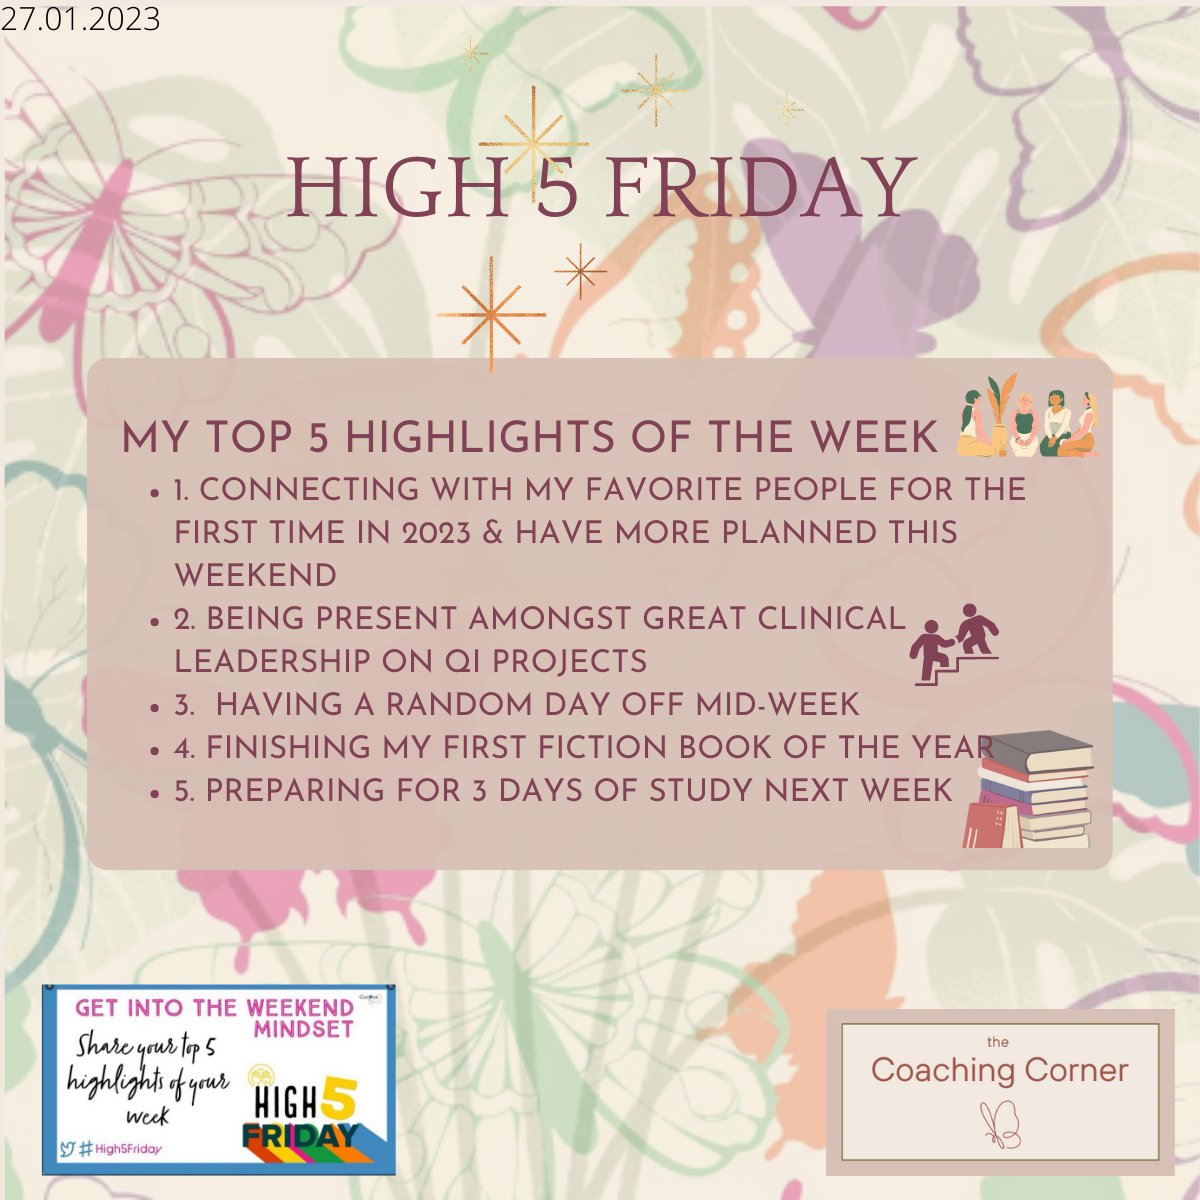 I nearly convinced myself not to do this because I’m feeling tired. I then reminded myself how #high5friday is 1). A healthy way to end the  week, 2). An opportunity to show gratitude & 3). Another way for me to show my appreciation to those around me. Have a lovely weekend